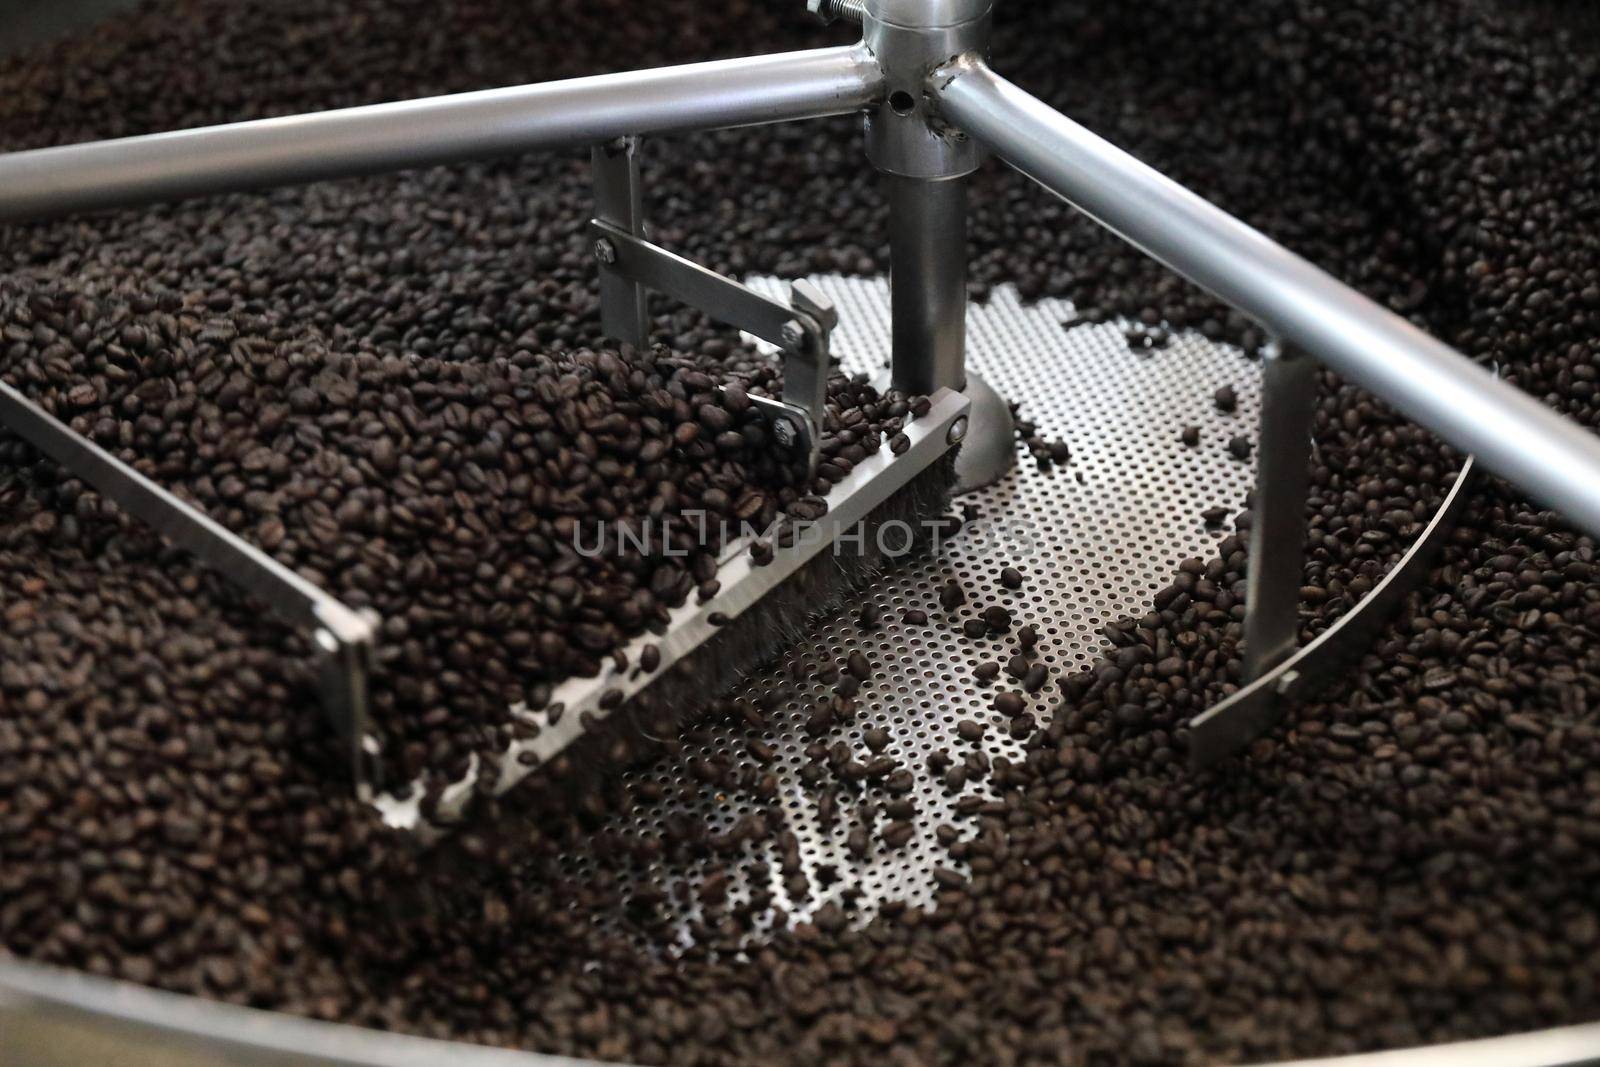 Coffee beans roasting with machine in close up